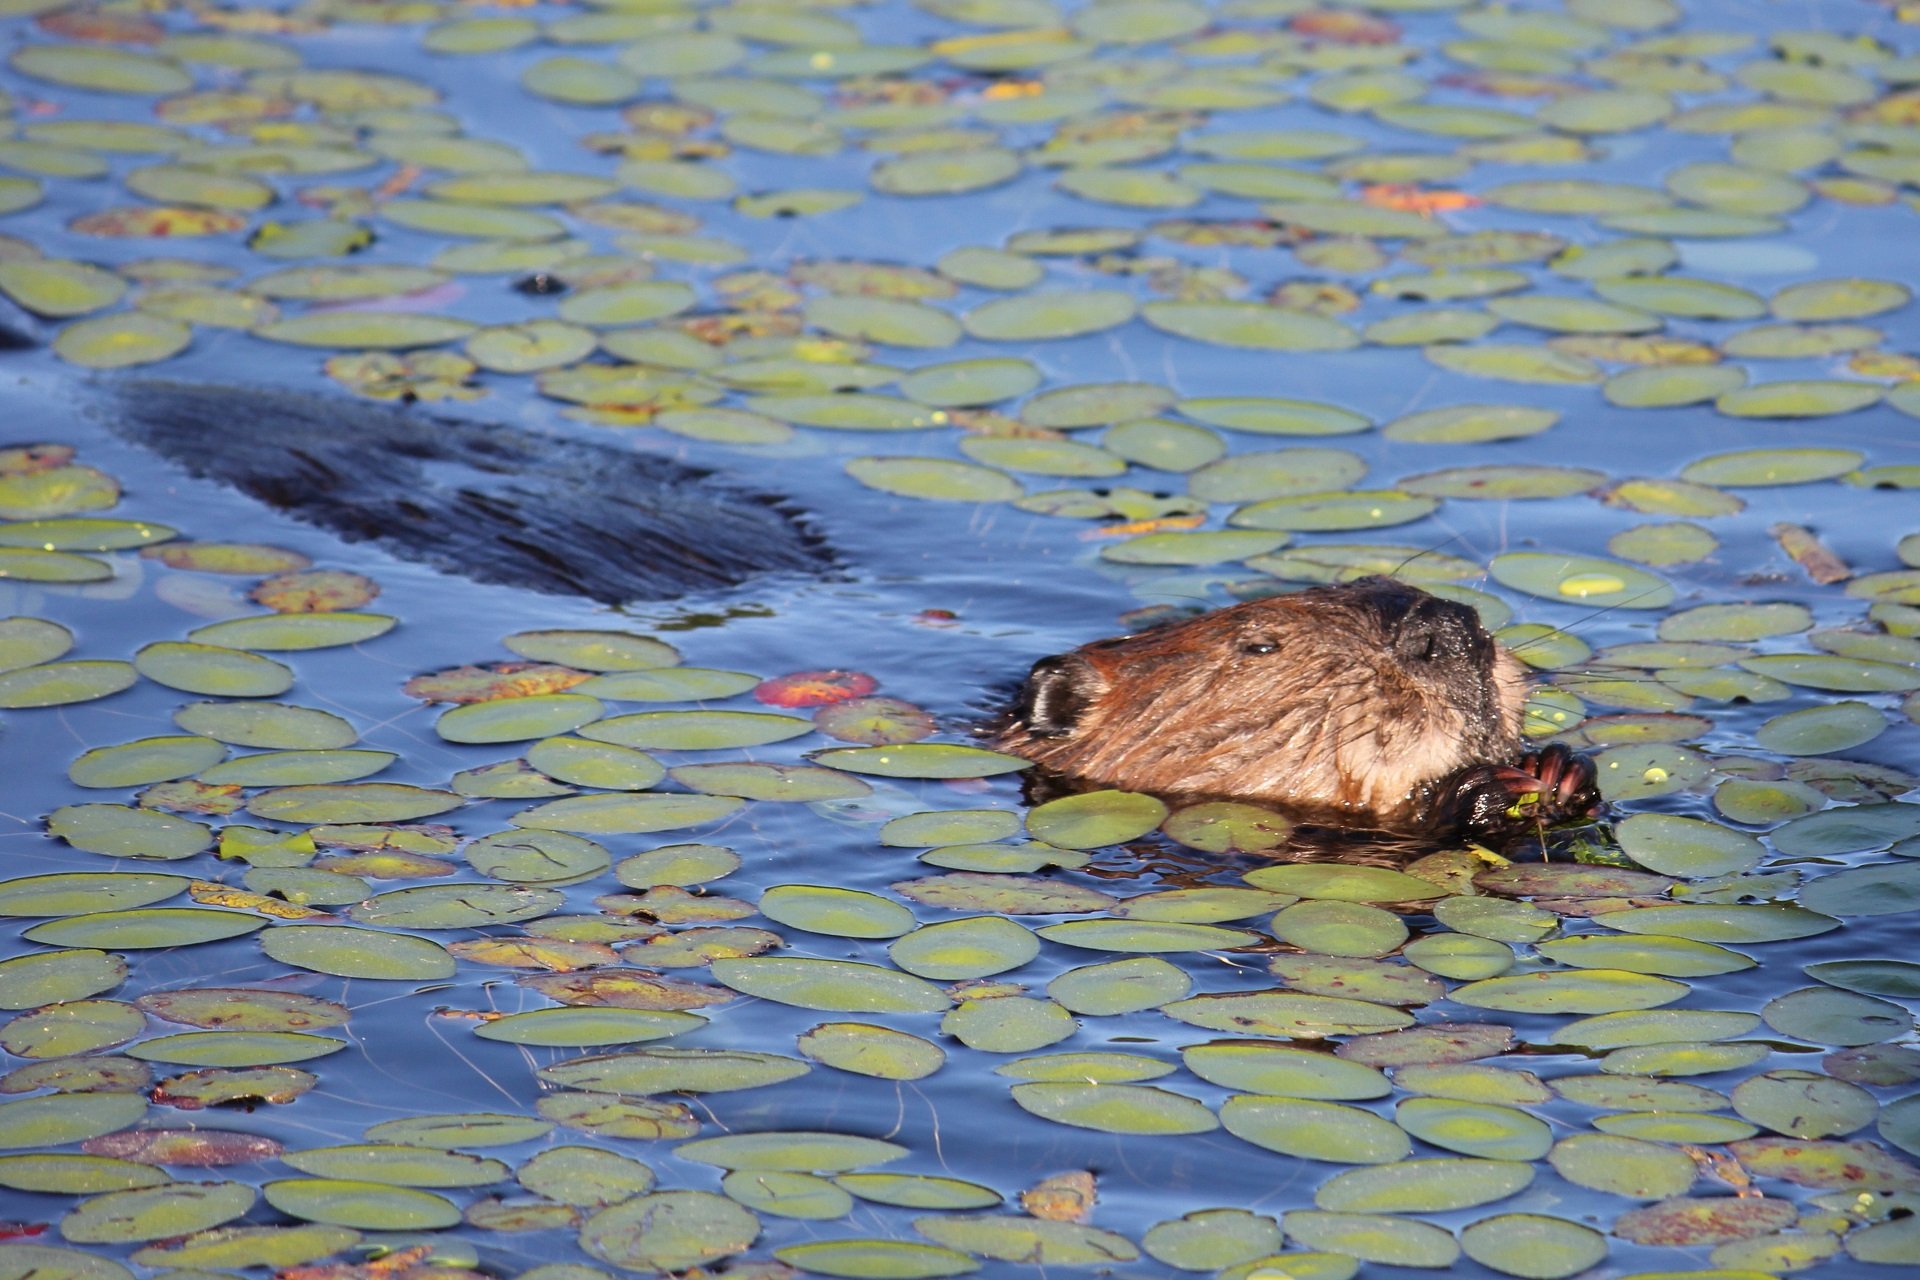 A beaver swims through lily pads.